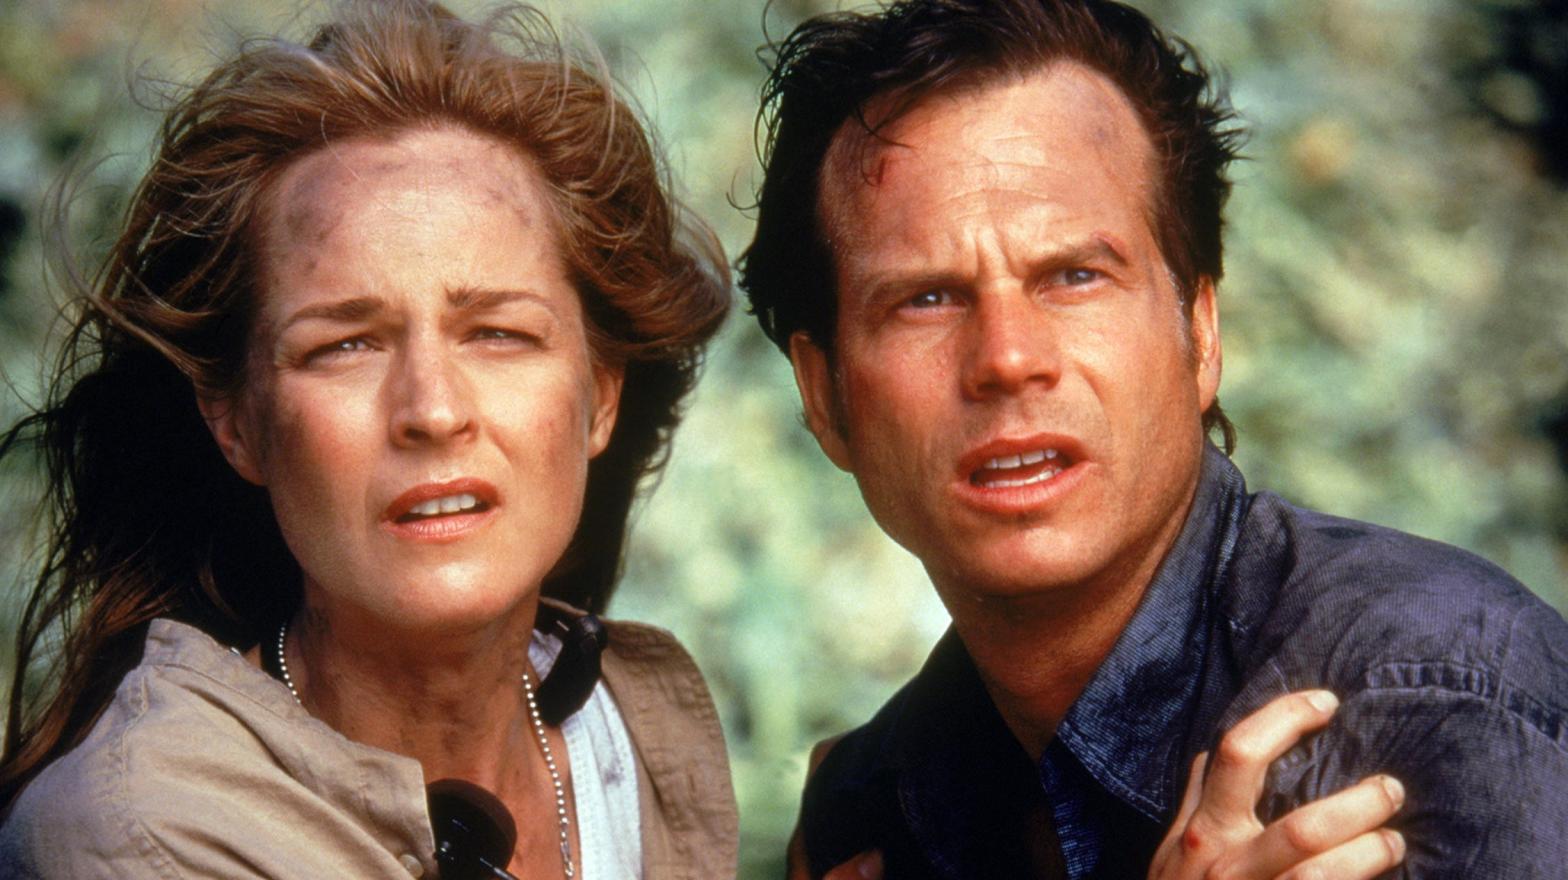 Helen Hunt may return for a sequel to Twister. (Image: Warner Bros.)